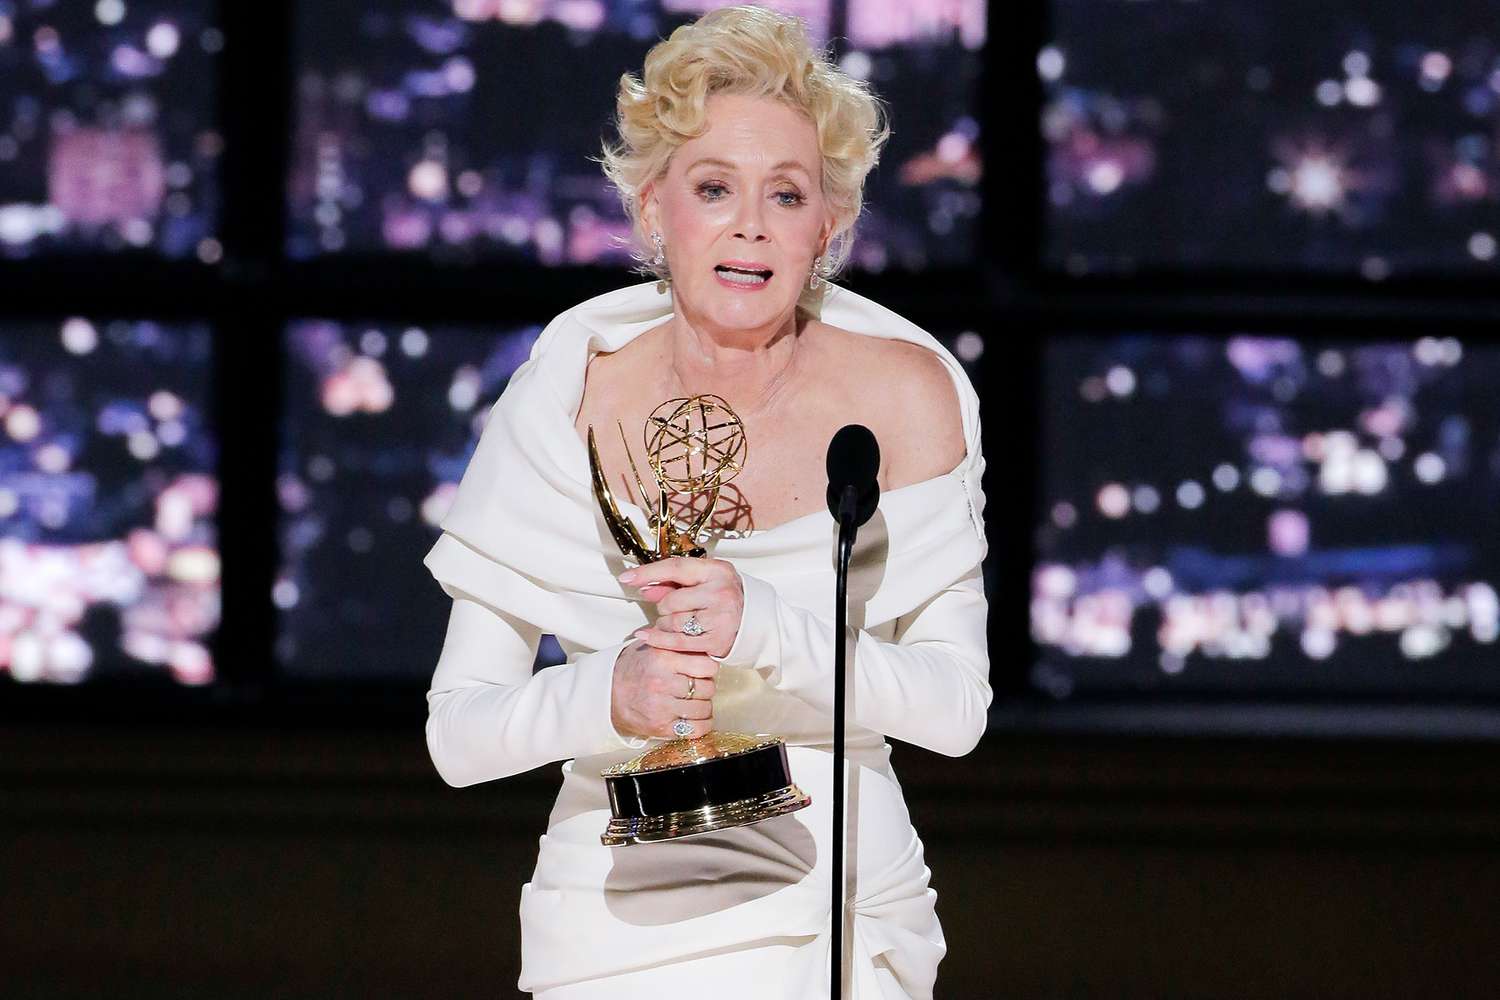 'Hacks' star Jean Smart wins the Emmy for Outstanding Lead Actress in a Comedy Series